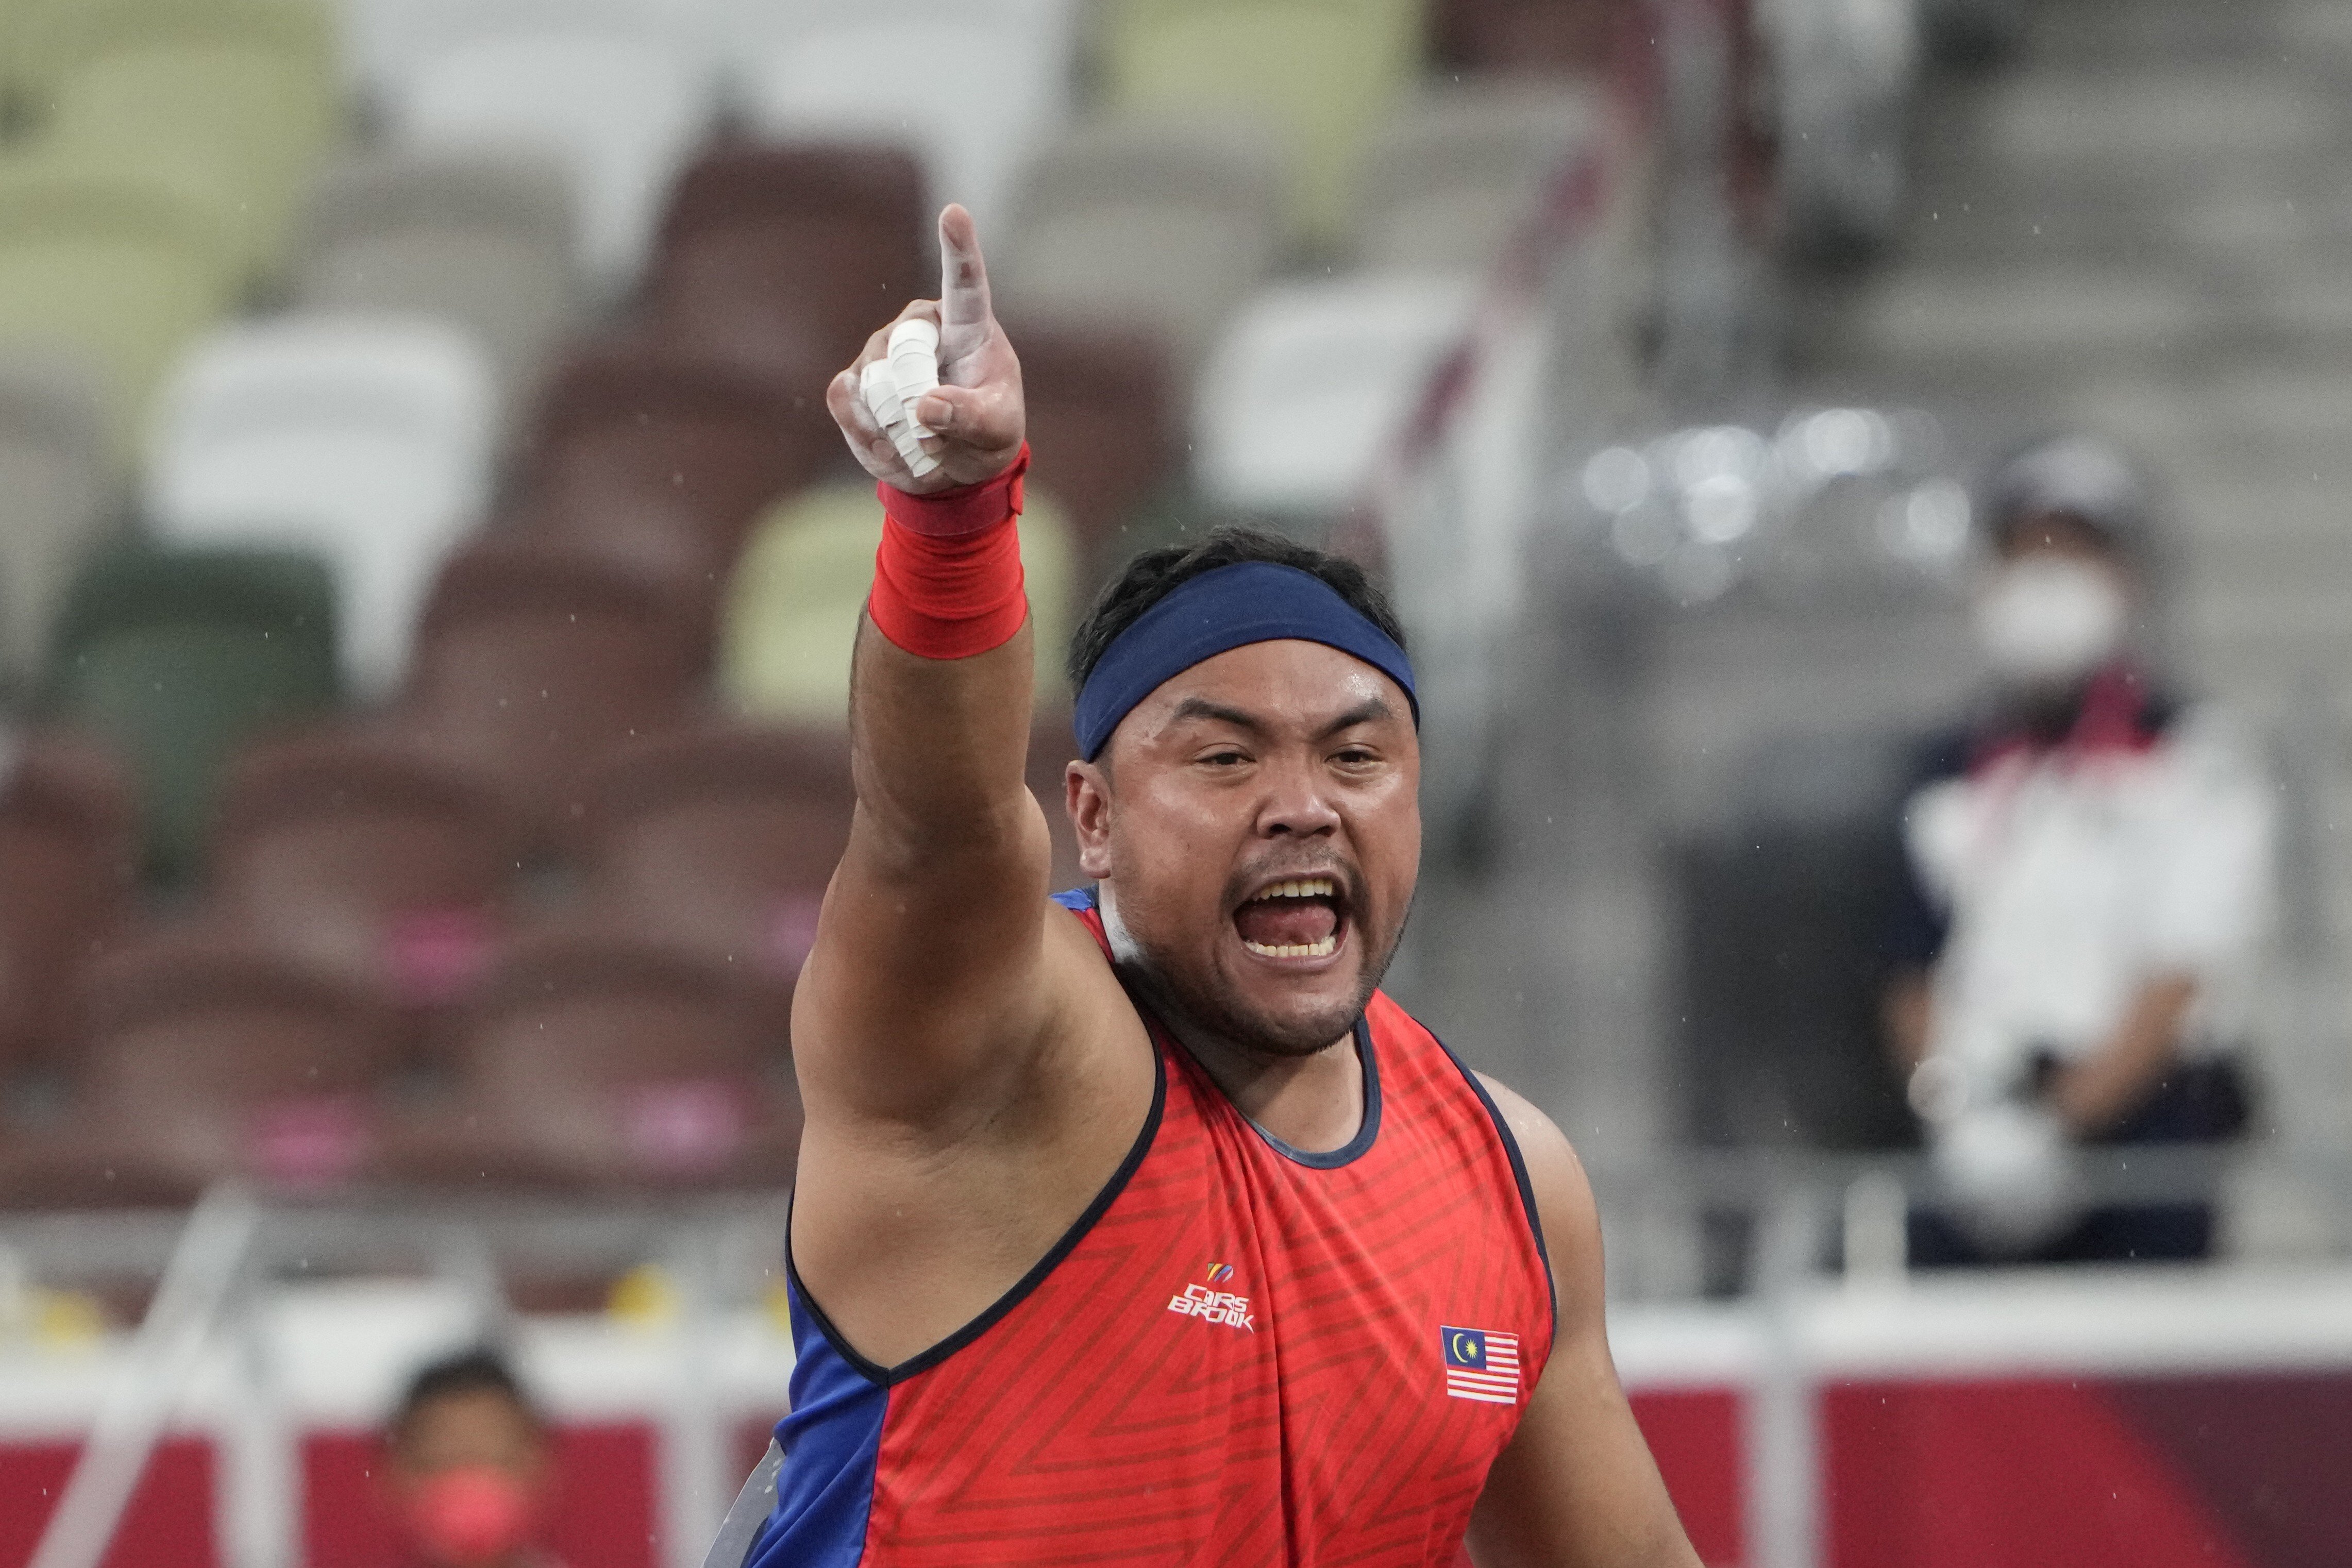 Muhammad Ziyad Zolkefli of Malaysia reacts on Tuesday after competing in the men's shot put F20 final during the Tokyo 2020 Paralympics Games at the National Stadium in Tokyo. Photo: AP